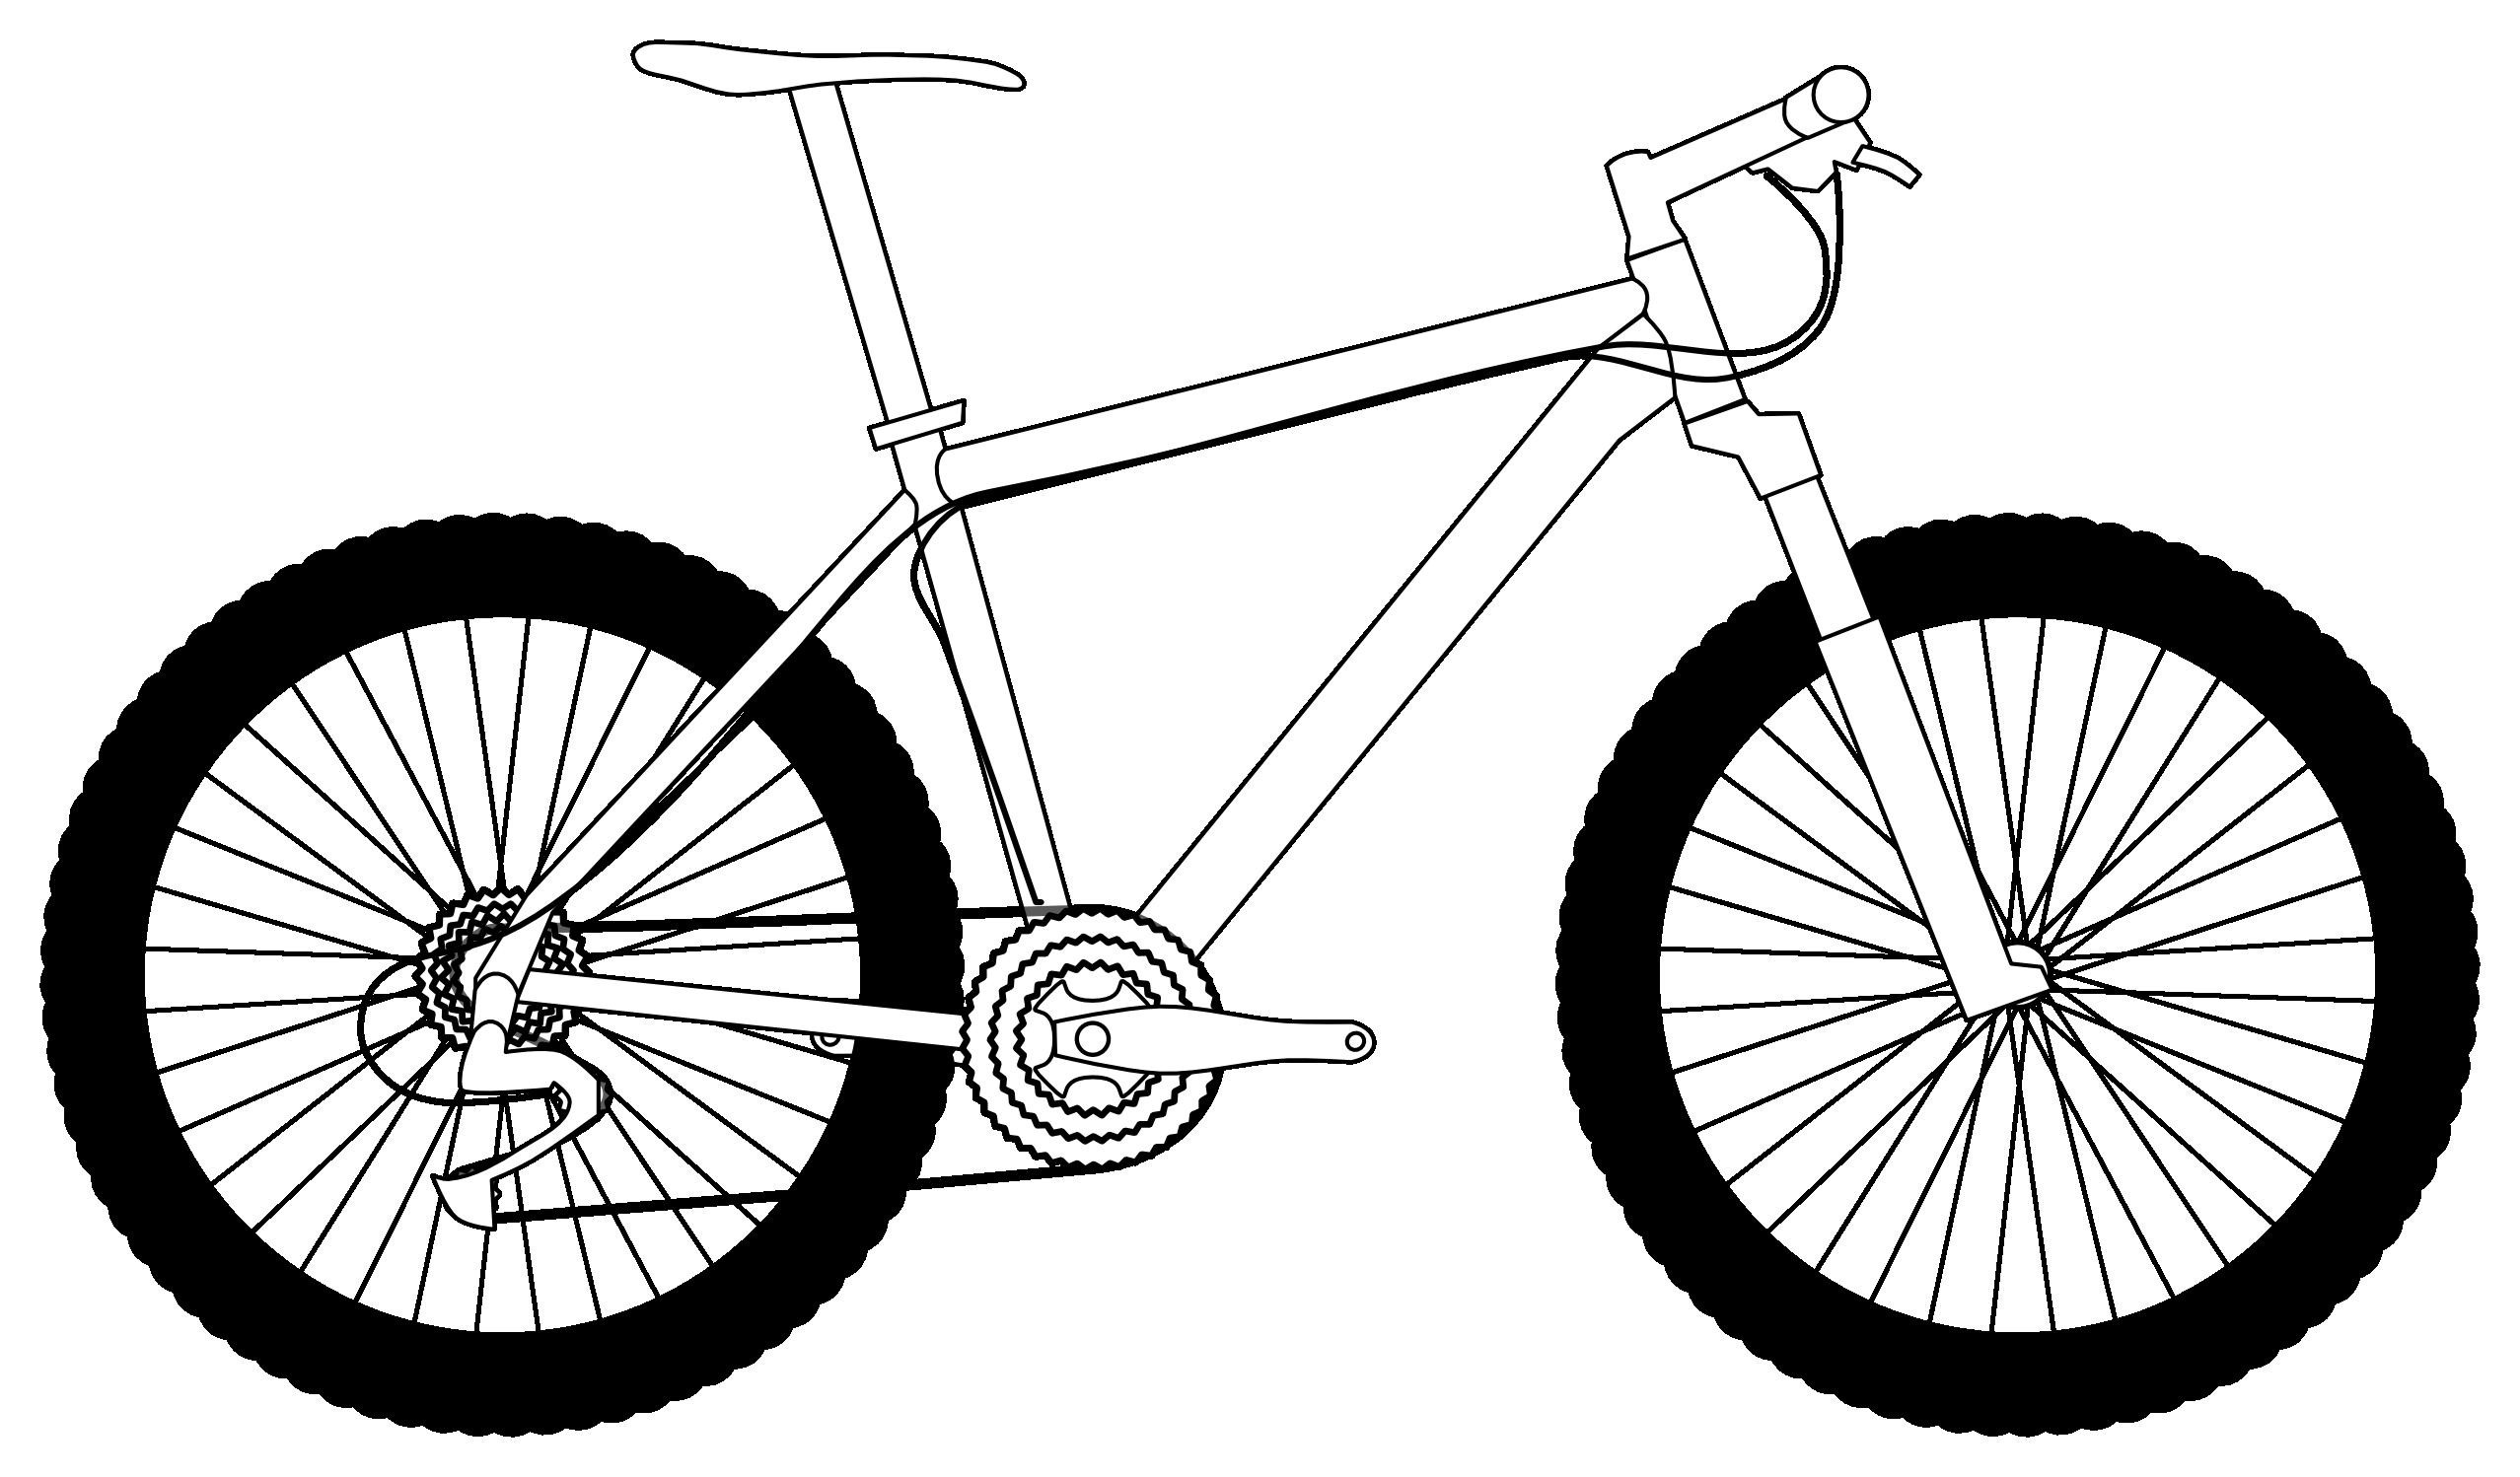 Coloring Pages | Easy How to Draw a Bike Tutorial and Bike Coloring Page